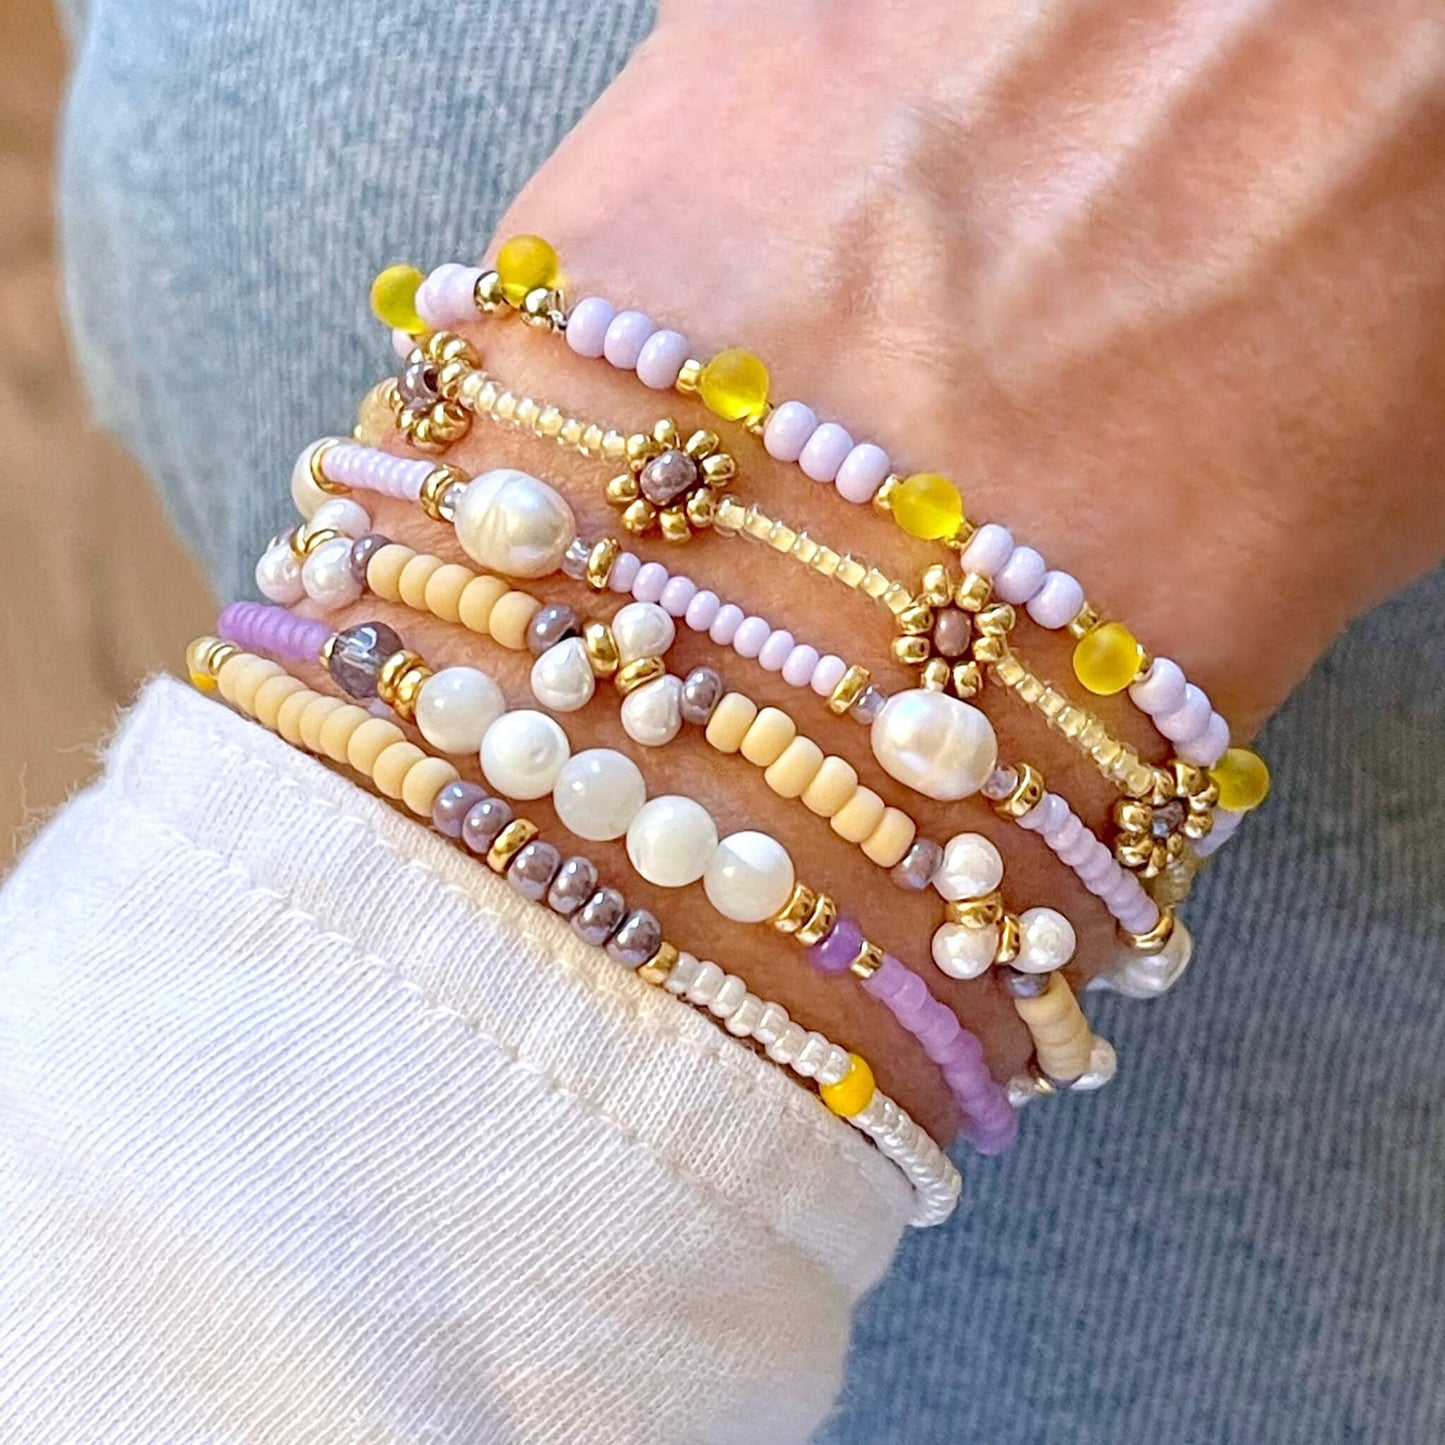 Yellow and lavender beaded bracelets with gold daisy chain flowers. Stack of 6 dainty pastel stretch bracelets with tiny seed beads and pearl beads.